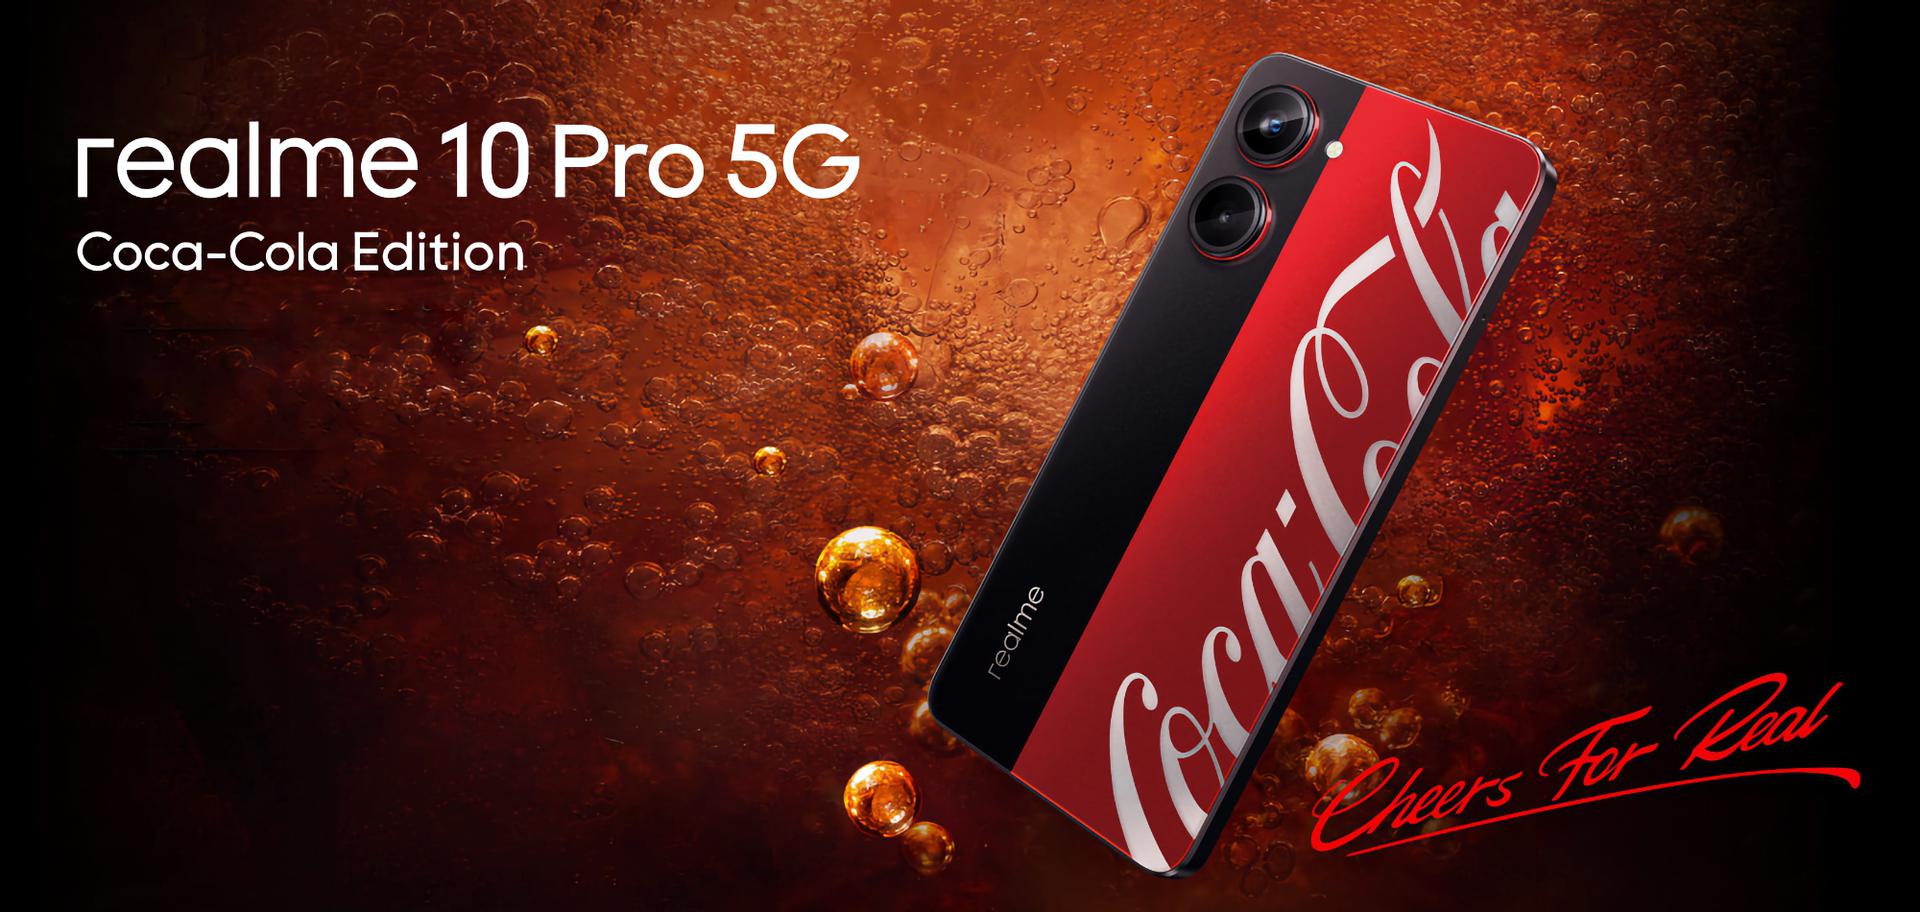 Insider showed a video of the realme 10 Pro 5G Coca Cola Edition: a special version of the realme 10 Pro 5G smartphone with a 120Hz screen and Snapdragon 695 chip